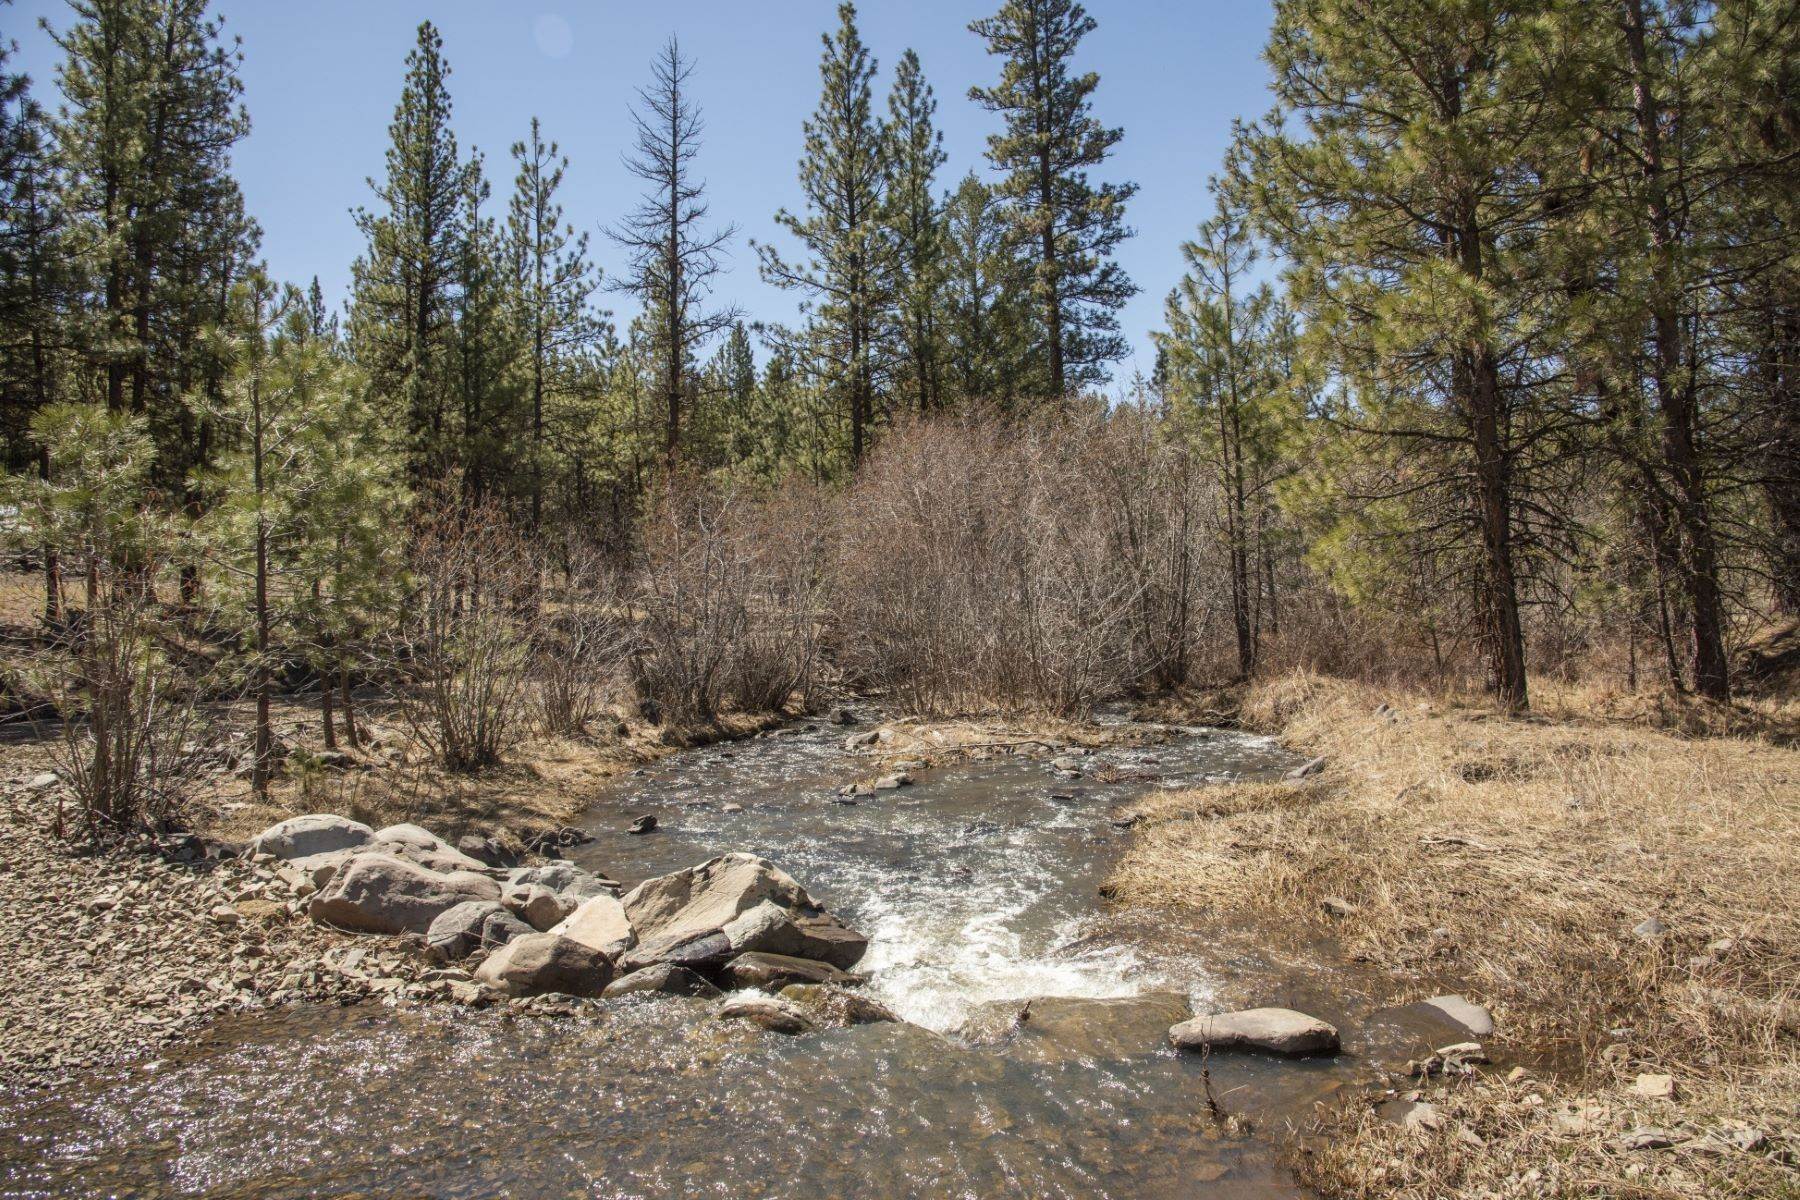 42. Farm and Ranch Properties for Sale at 27850 NE Old Wolf Creek Road Prineville, OR 97754 27850 NE Old Wolf Creek Road Prineville, Oregon 97754 United States